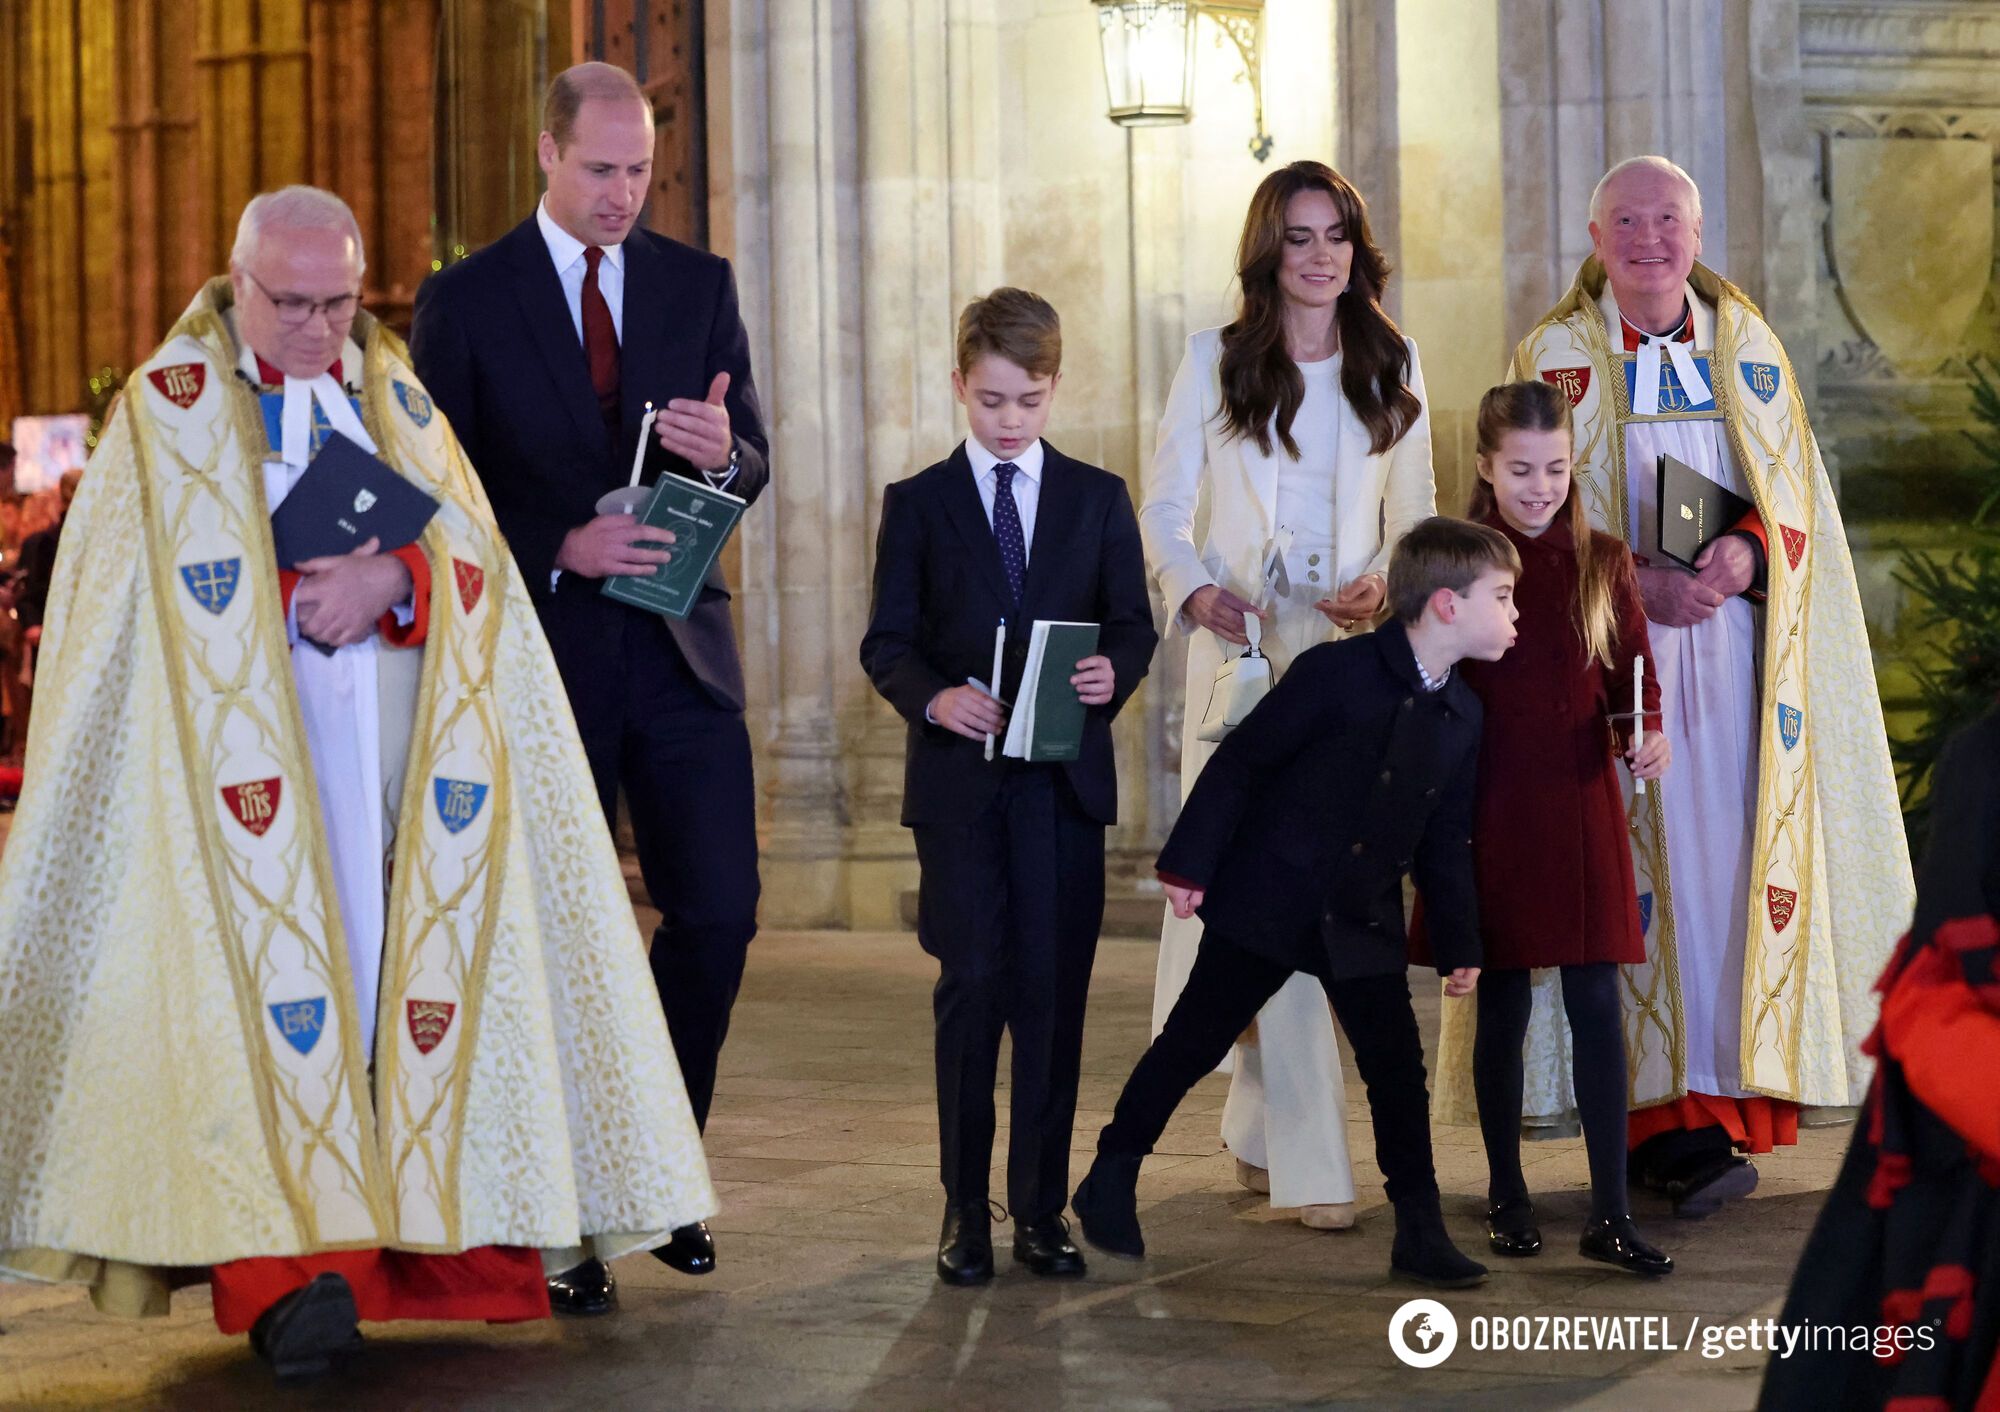 Poked his mom and pointed his finger: 5-year-old Prince Louis wowed the audience at a Christmas concert